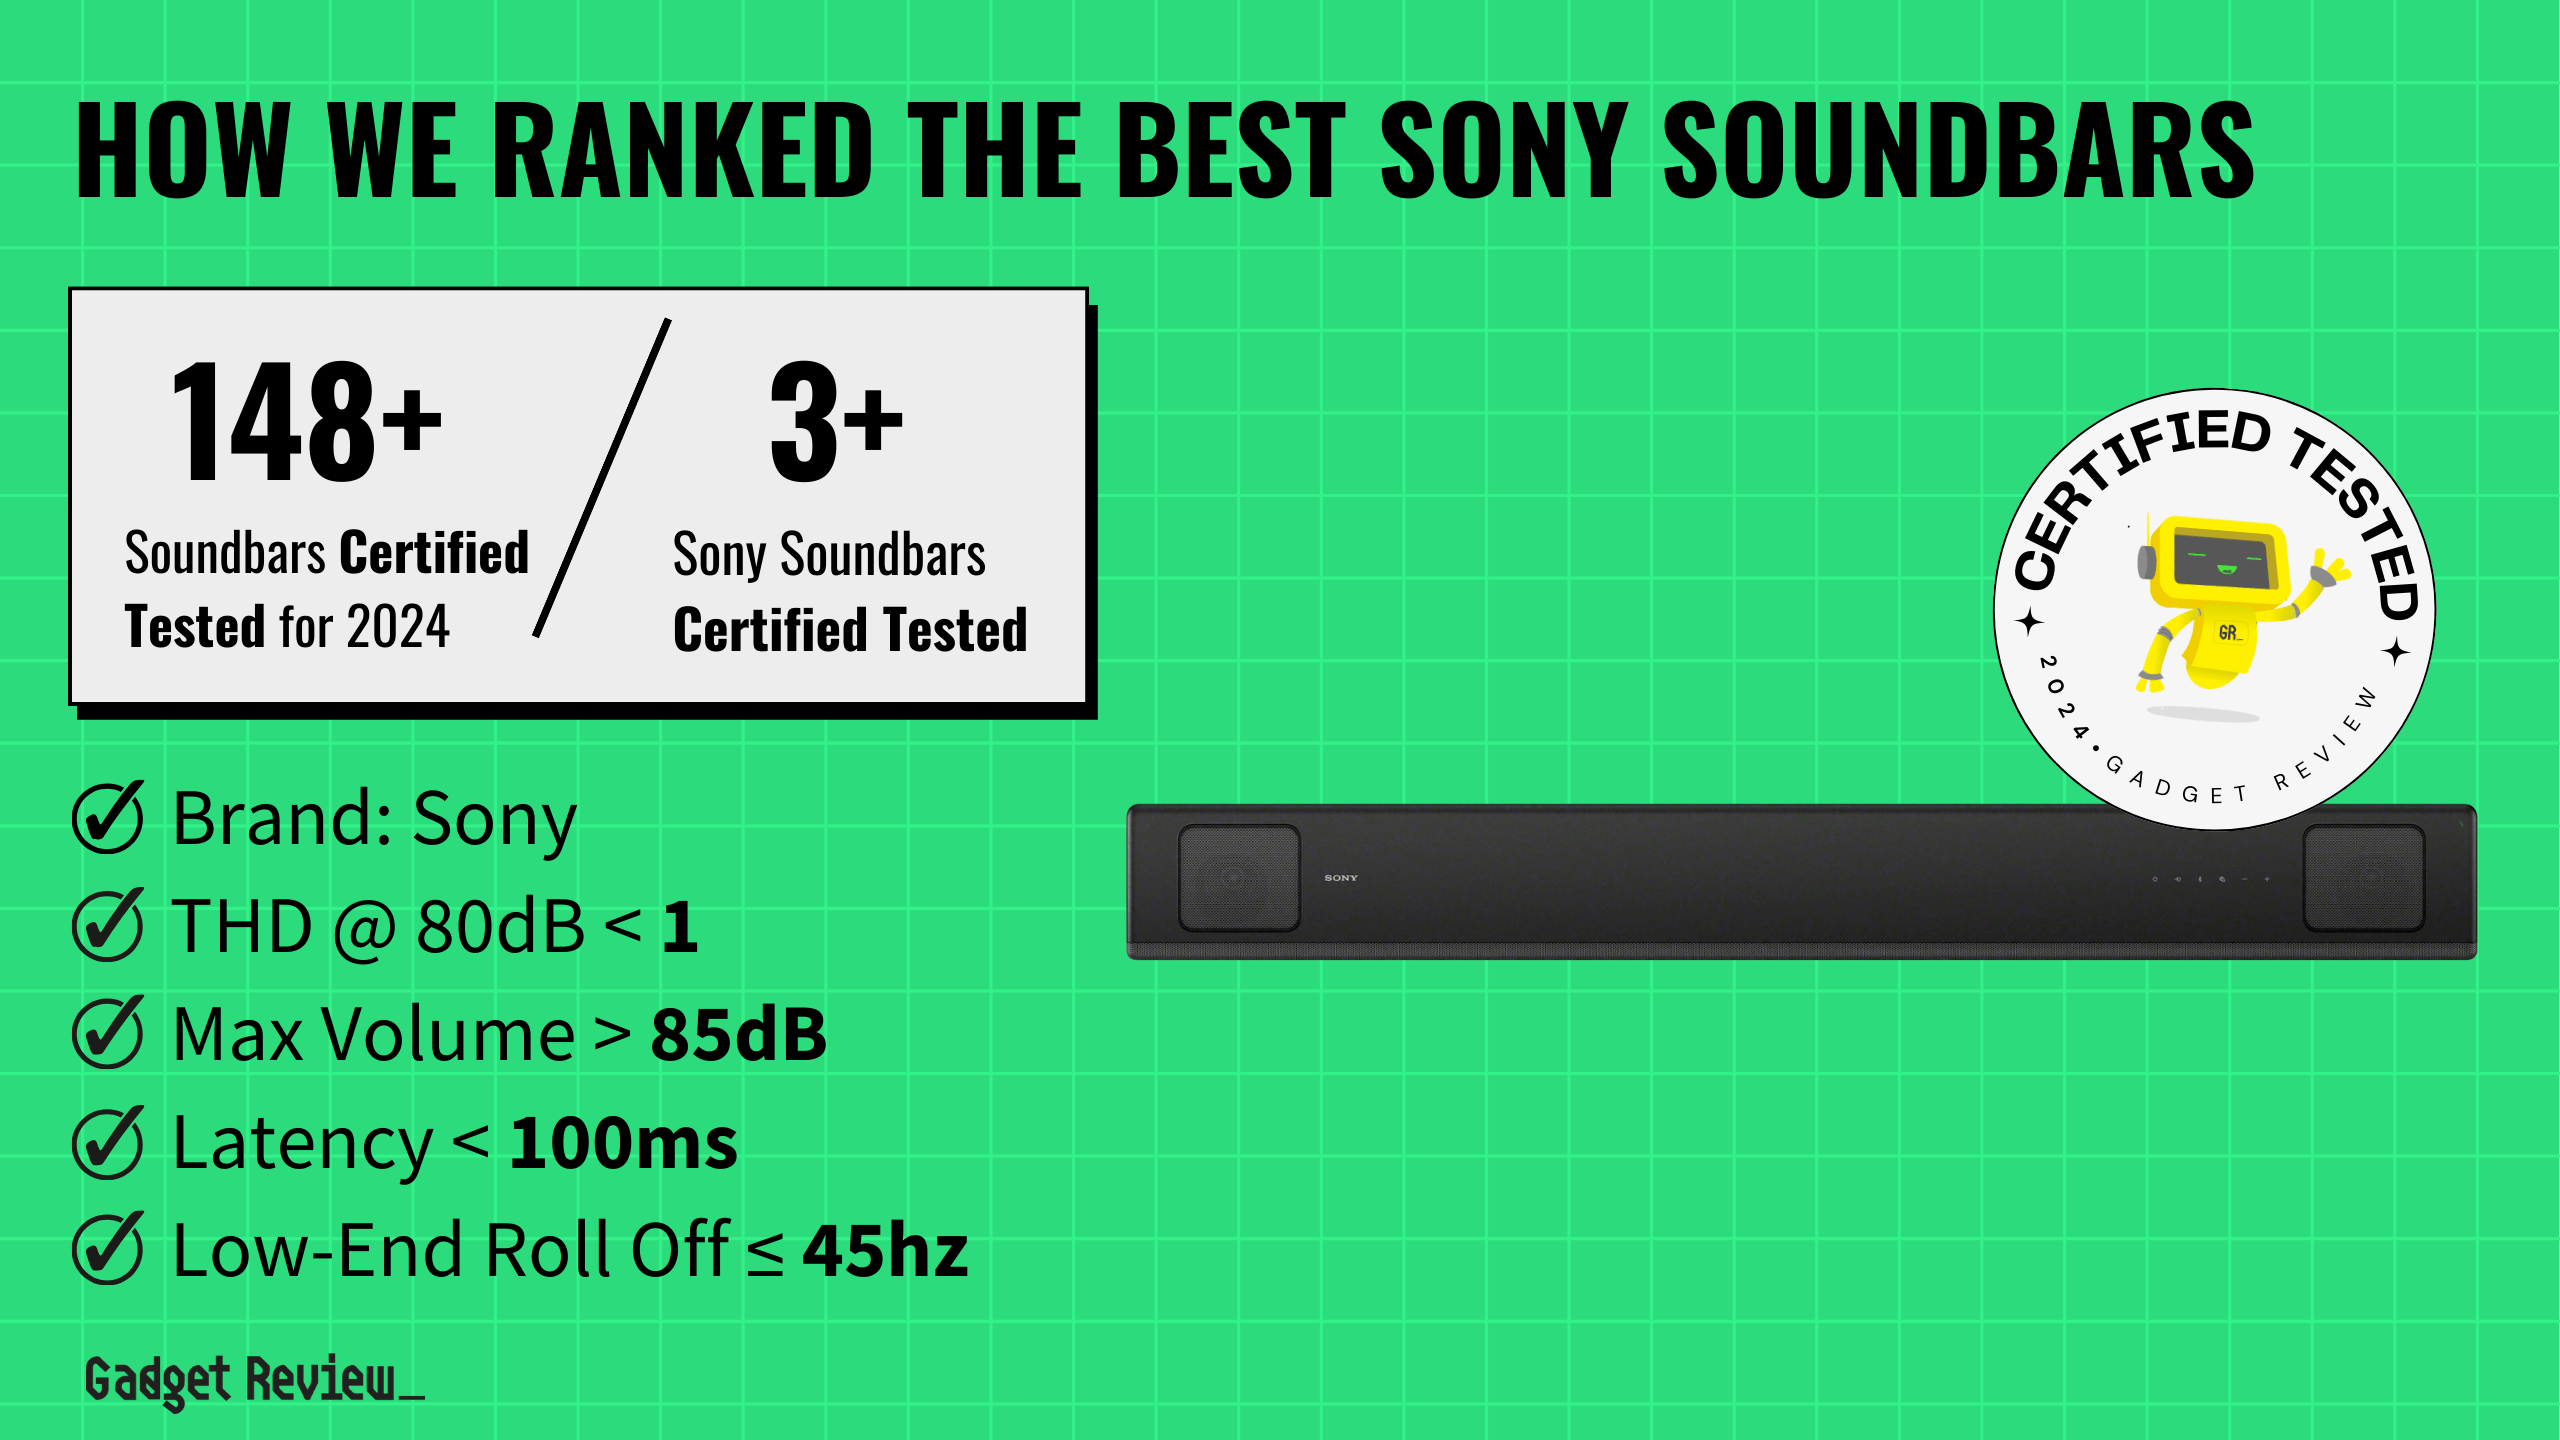 best sony sound bar guide that shows the top best soundbar model